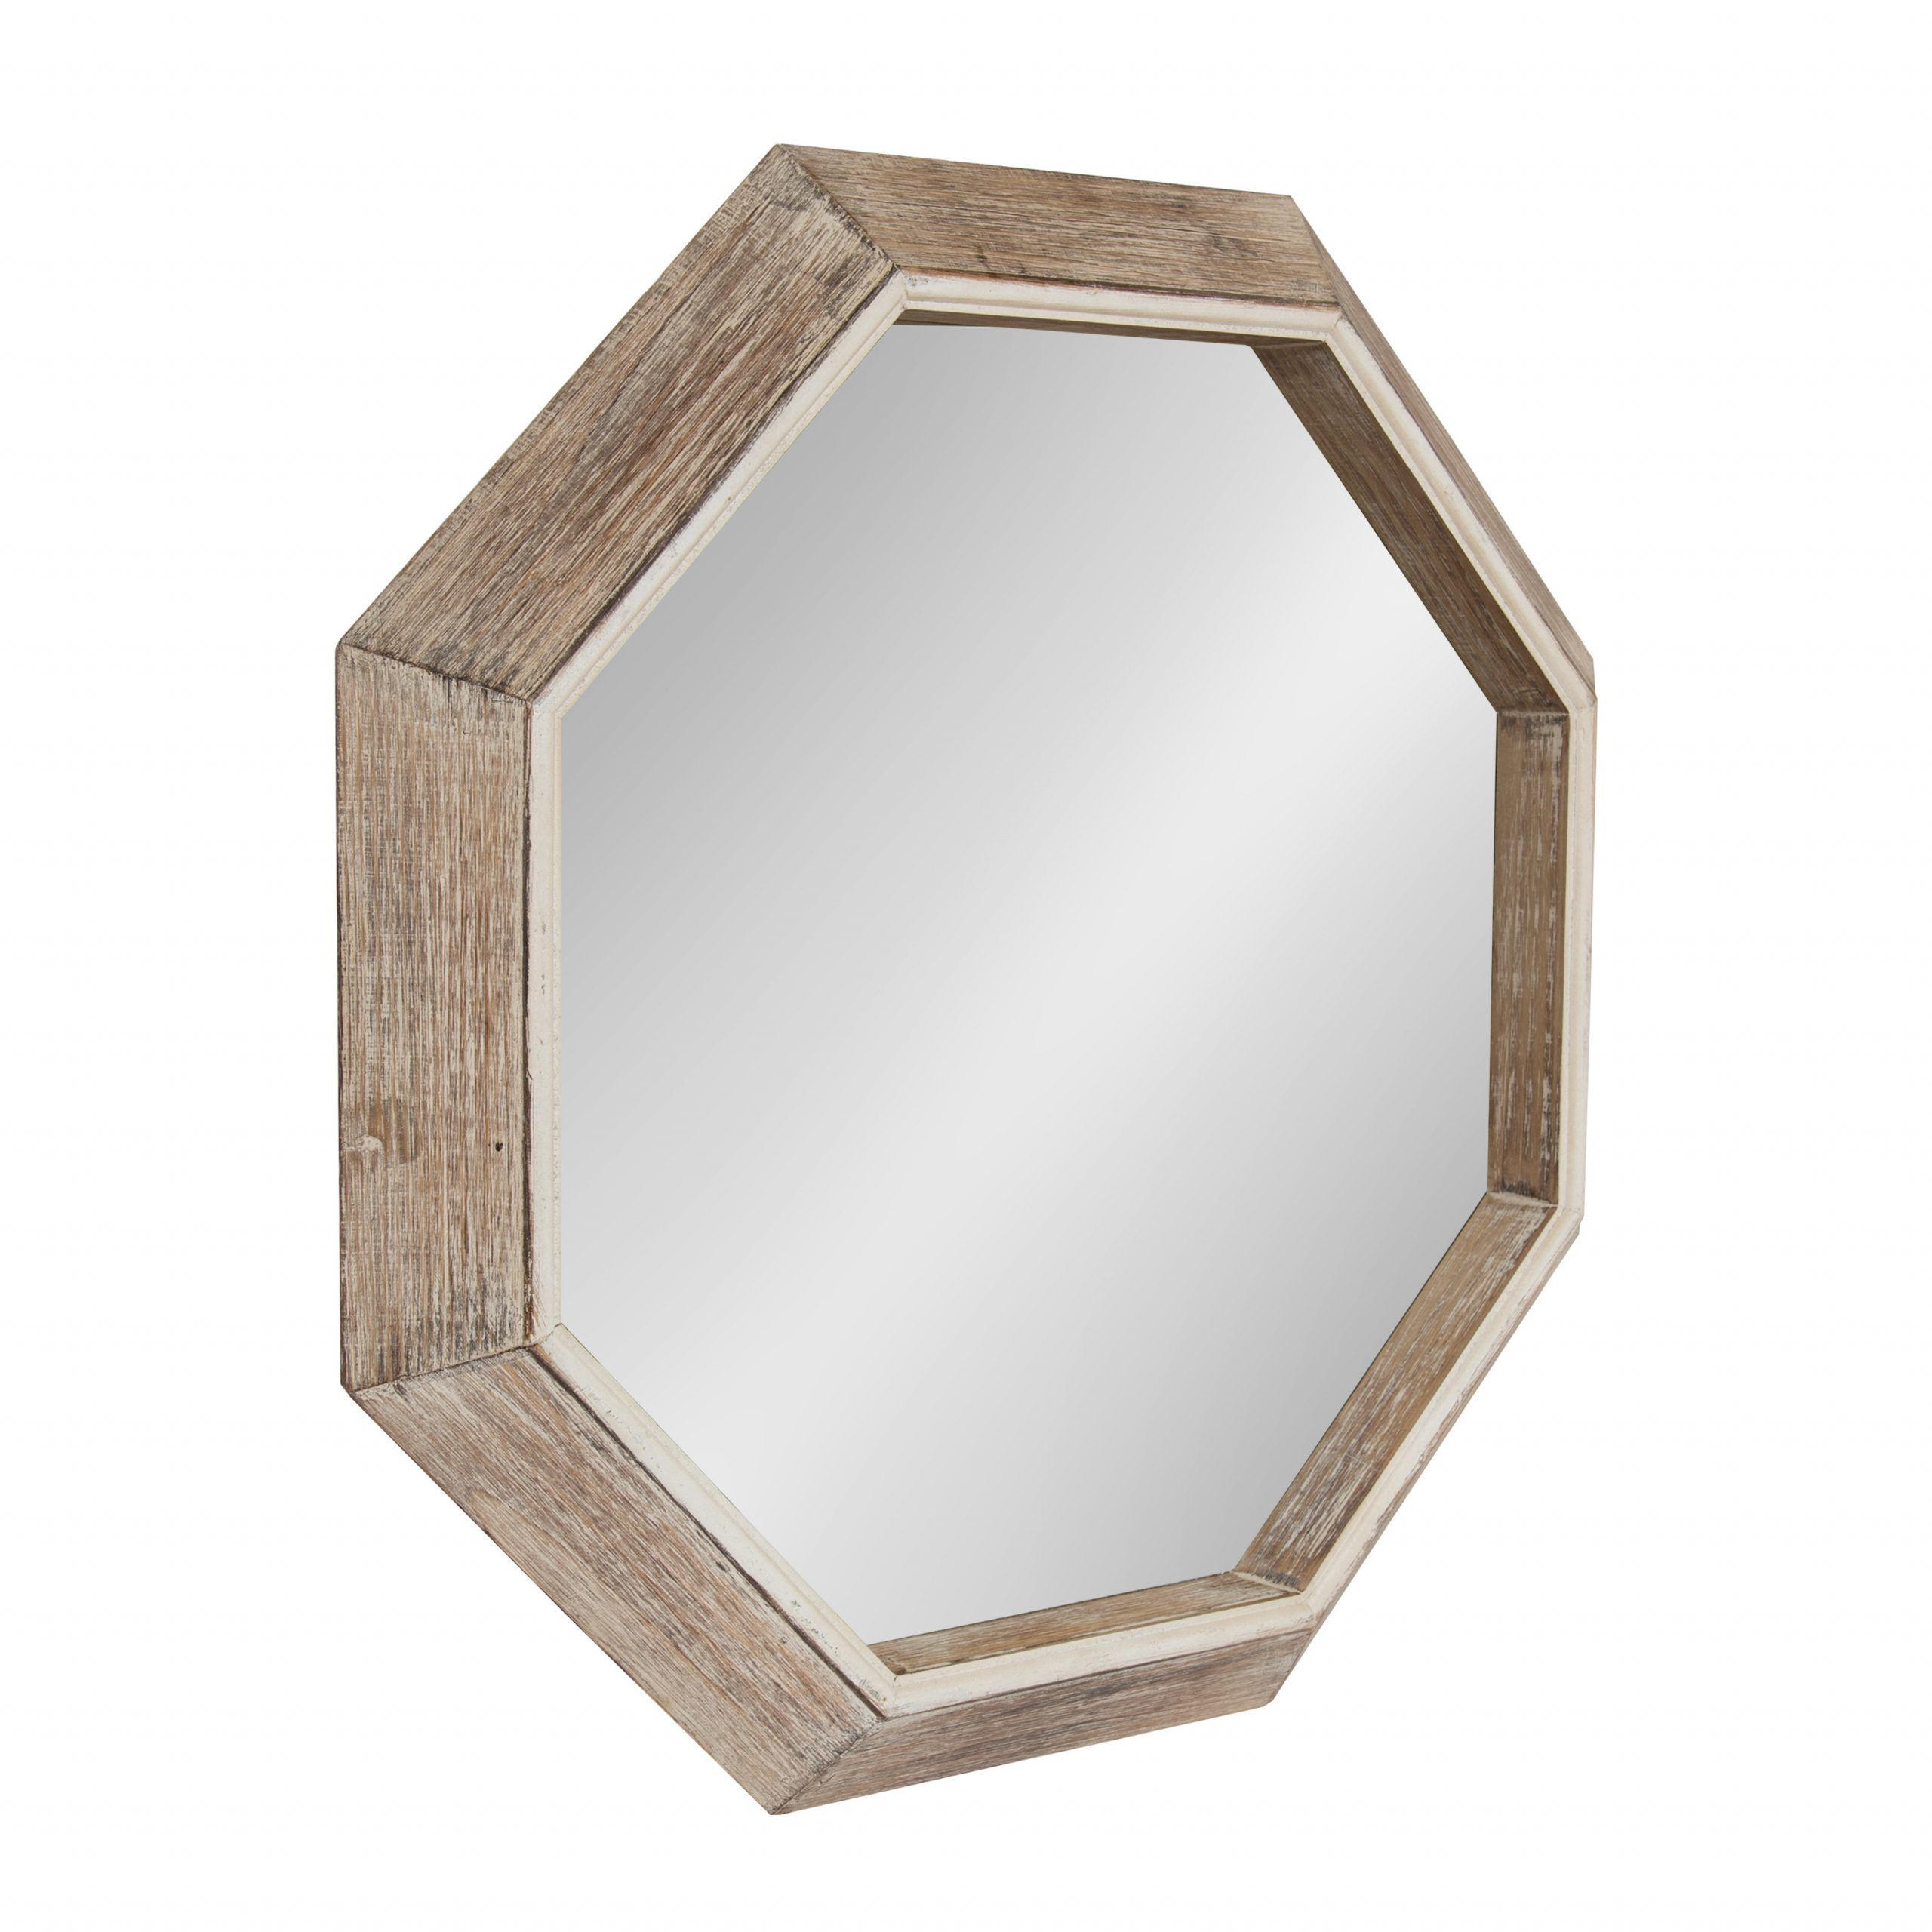 Kate And Laurel – Yves Large Rustic Wooden Octagon Wall Mirror, White For Matte Black Octagonal Wall Mirrors (View 8 of 15)